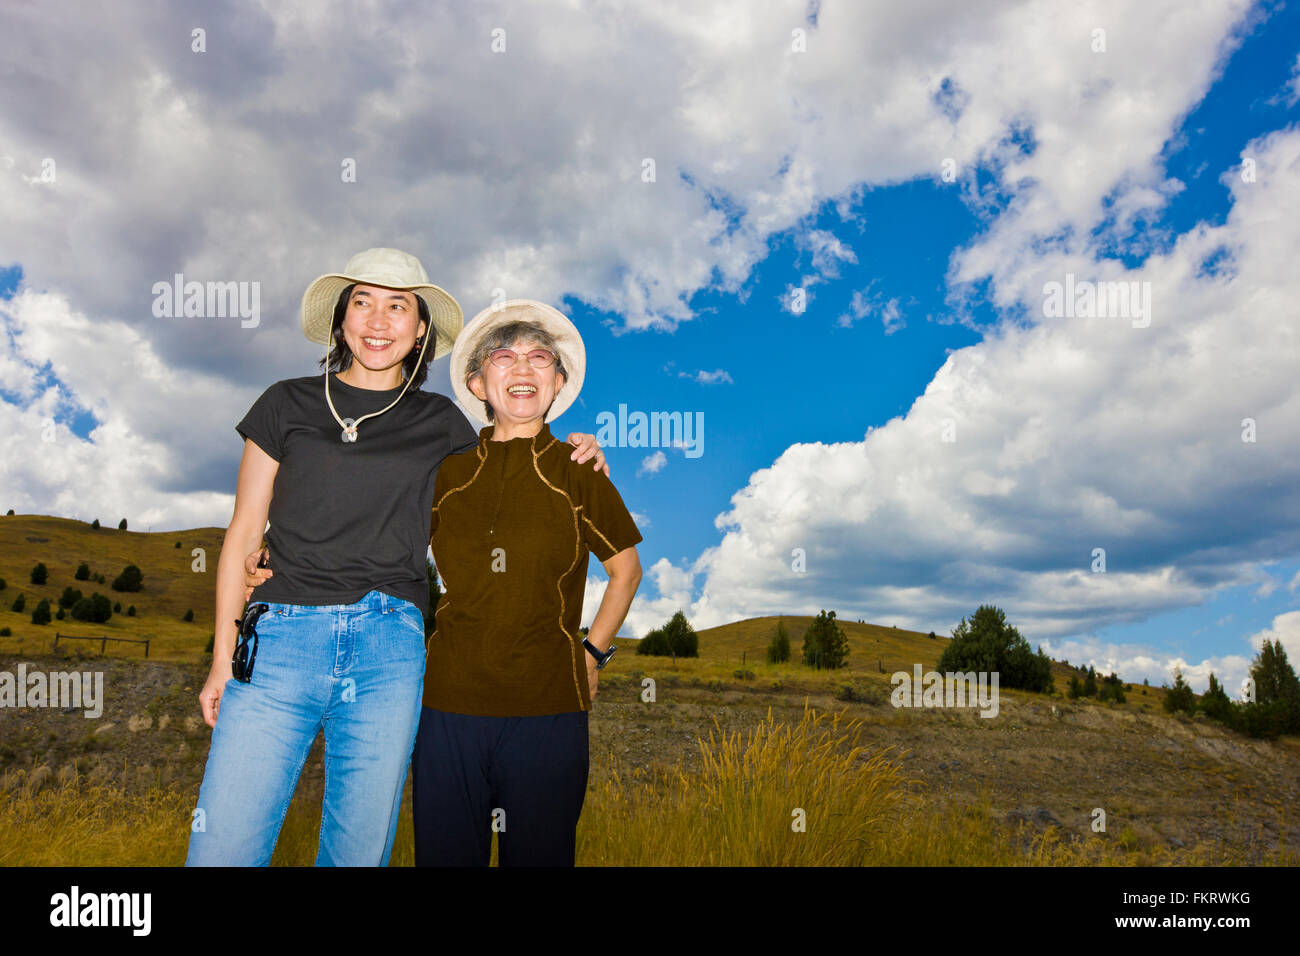 Japanese mother and daughter standing on hillside Banque D'Images